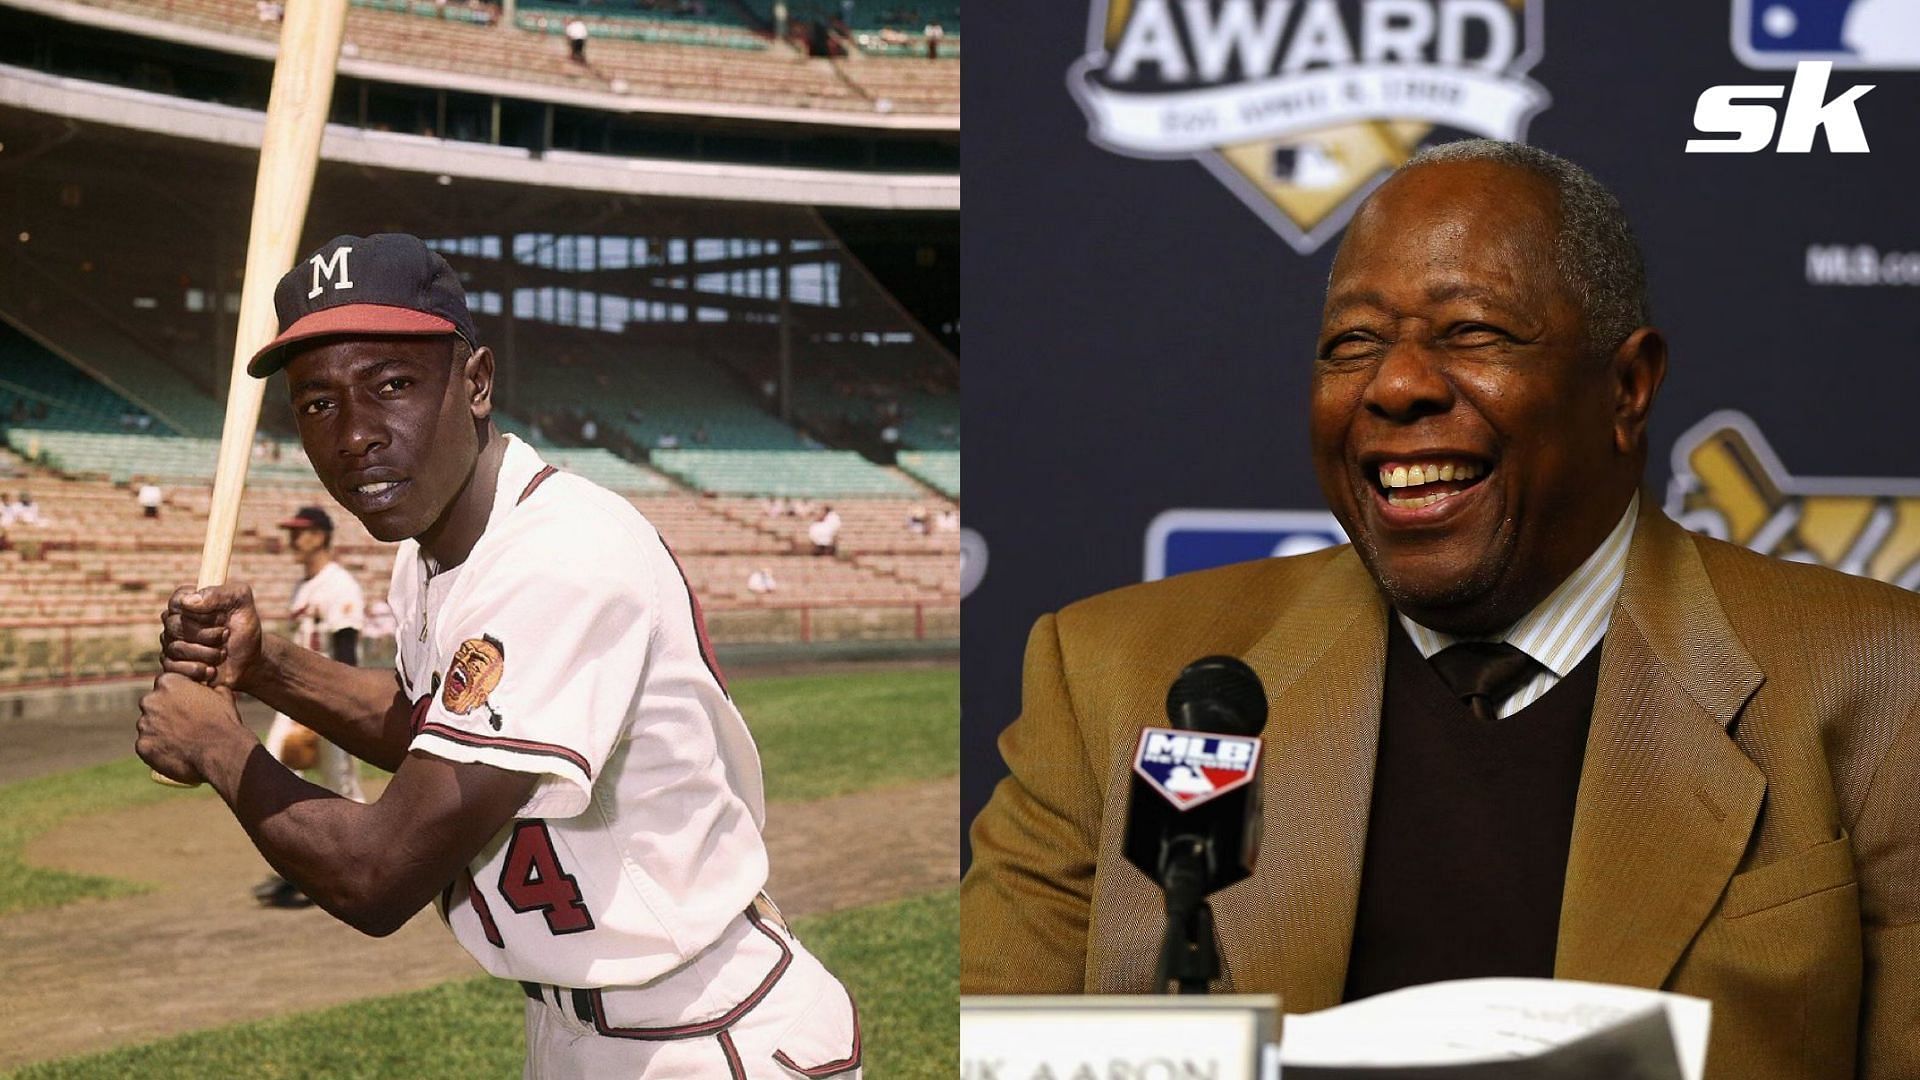 Hank Aaron received numerous death threats throughout his career with most coming during his pursuit of Babe Ruth